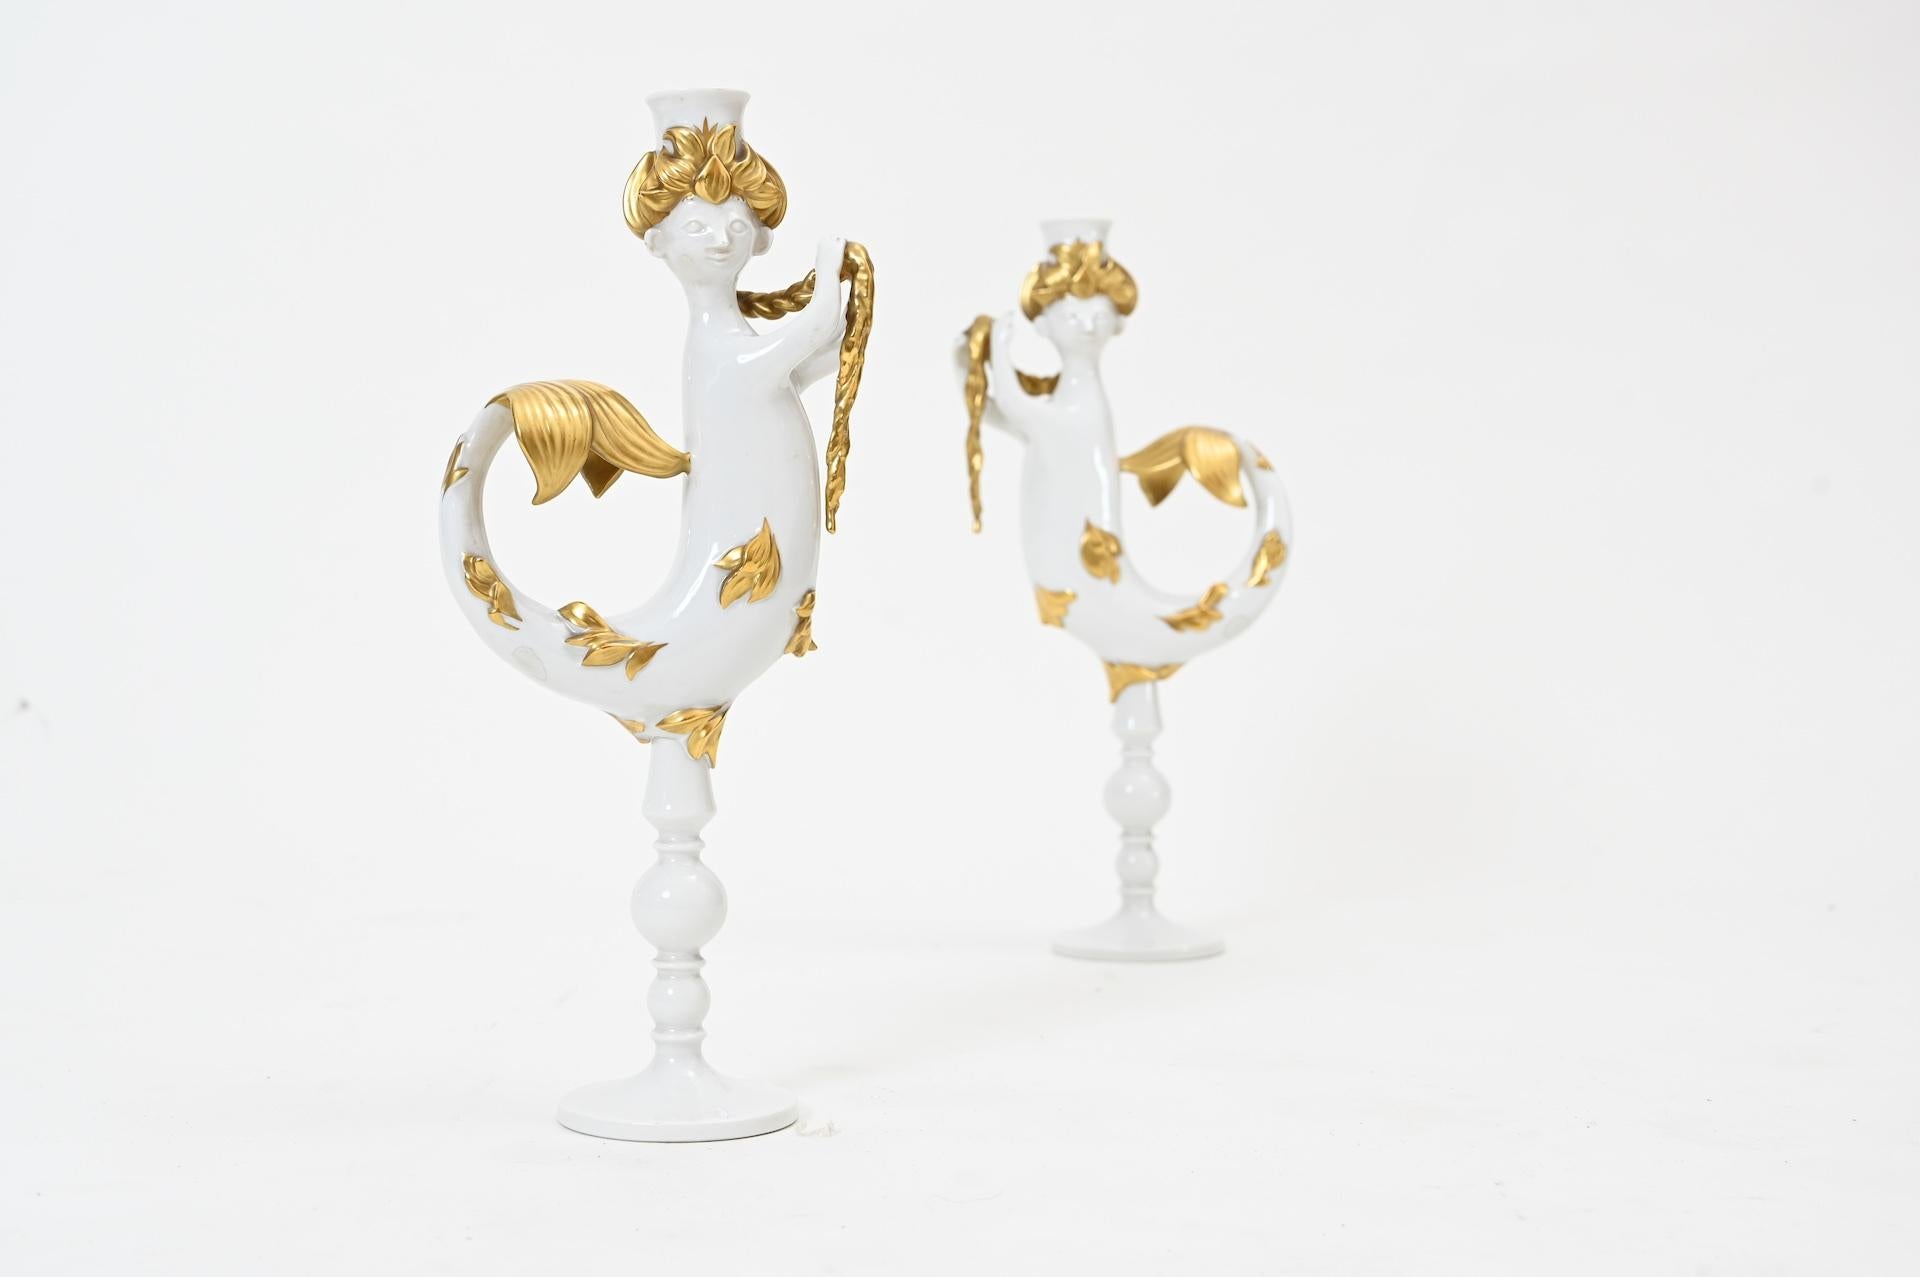 A pair of mermaid candlesticks by Bjorn Wiinblad, white and gold.